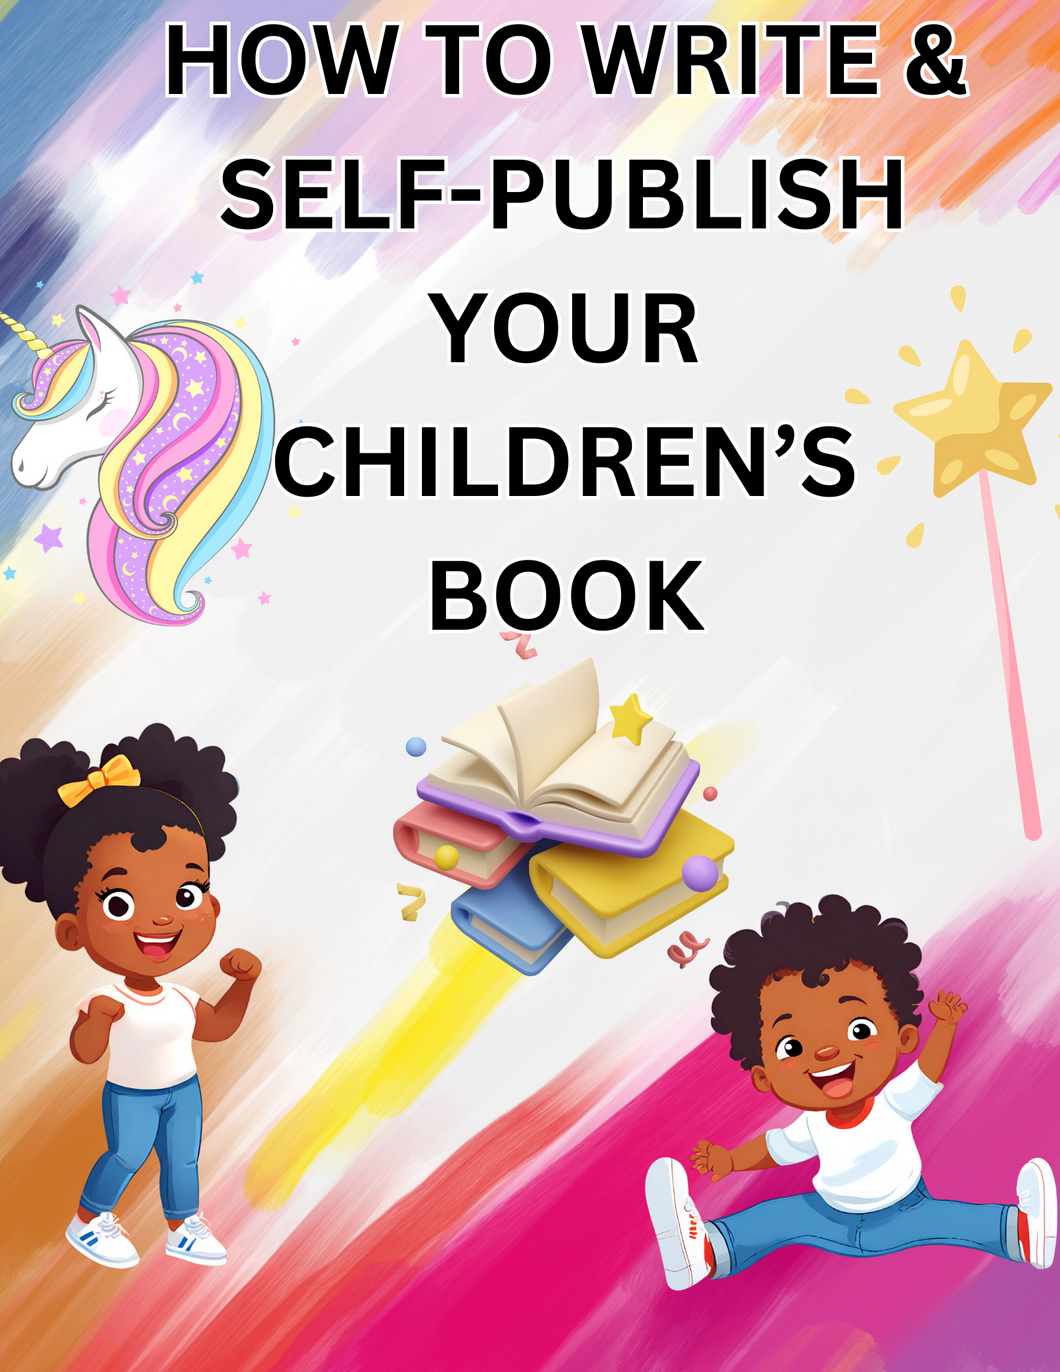 HOW TO WRITE & SELF-PUBLISH YOUR CHILDREN'S E-BOOK